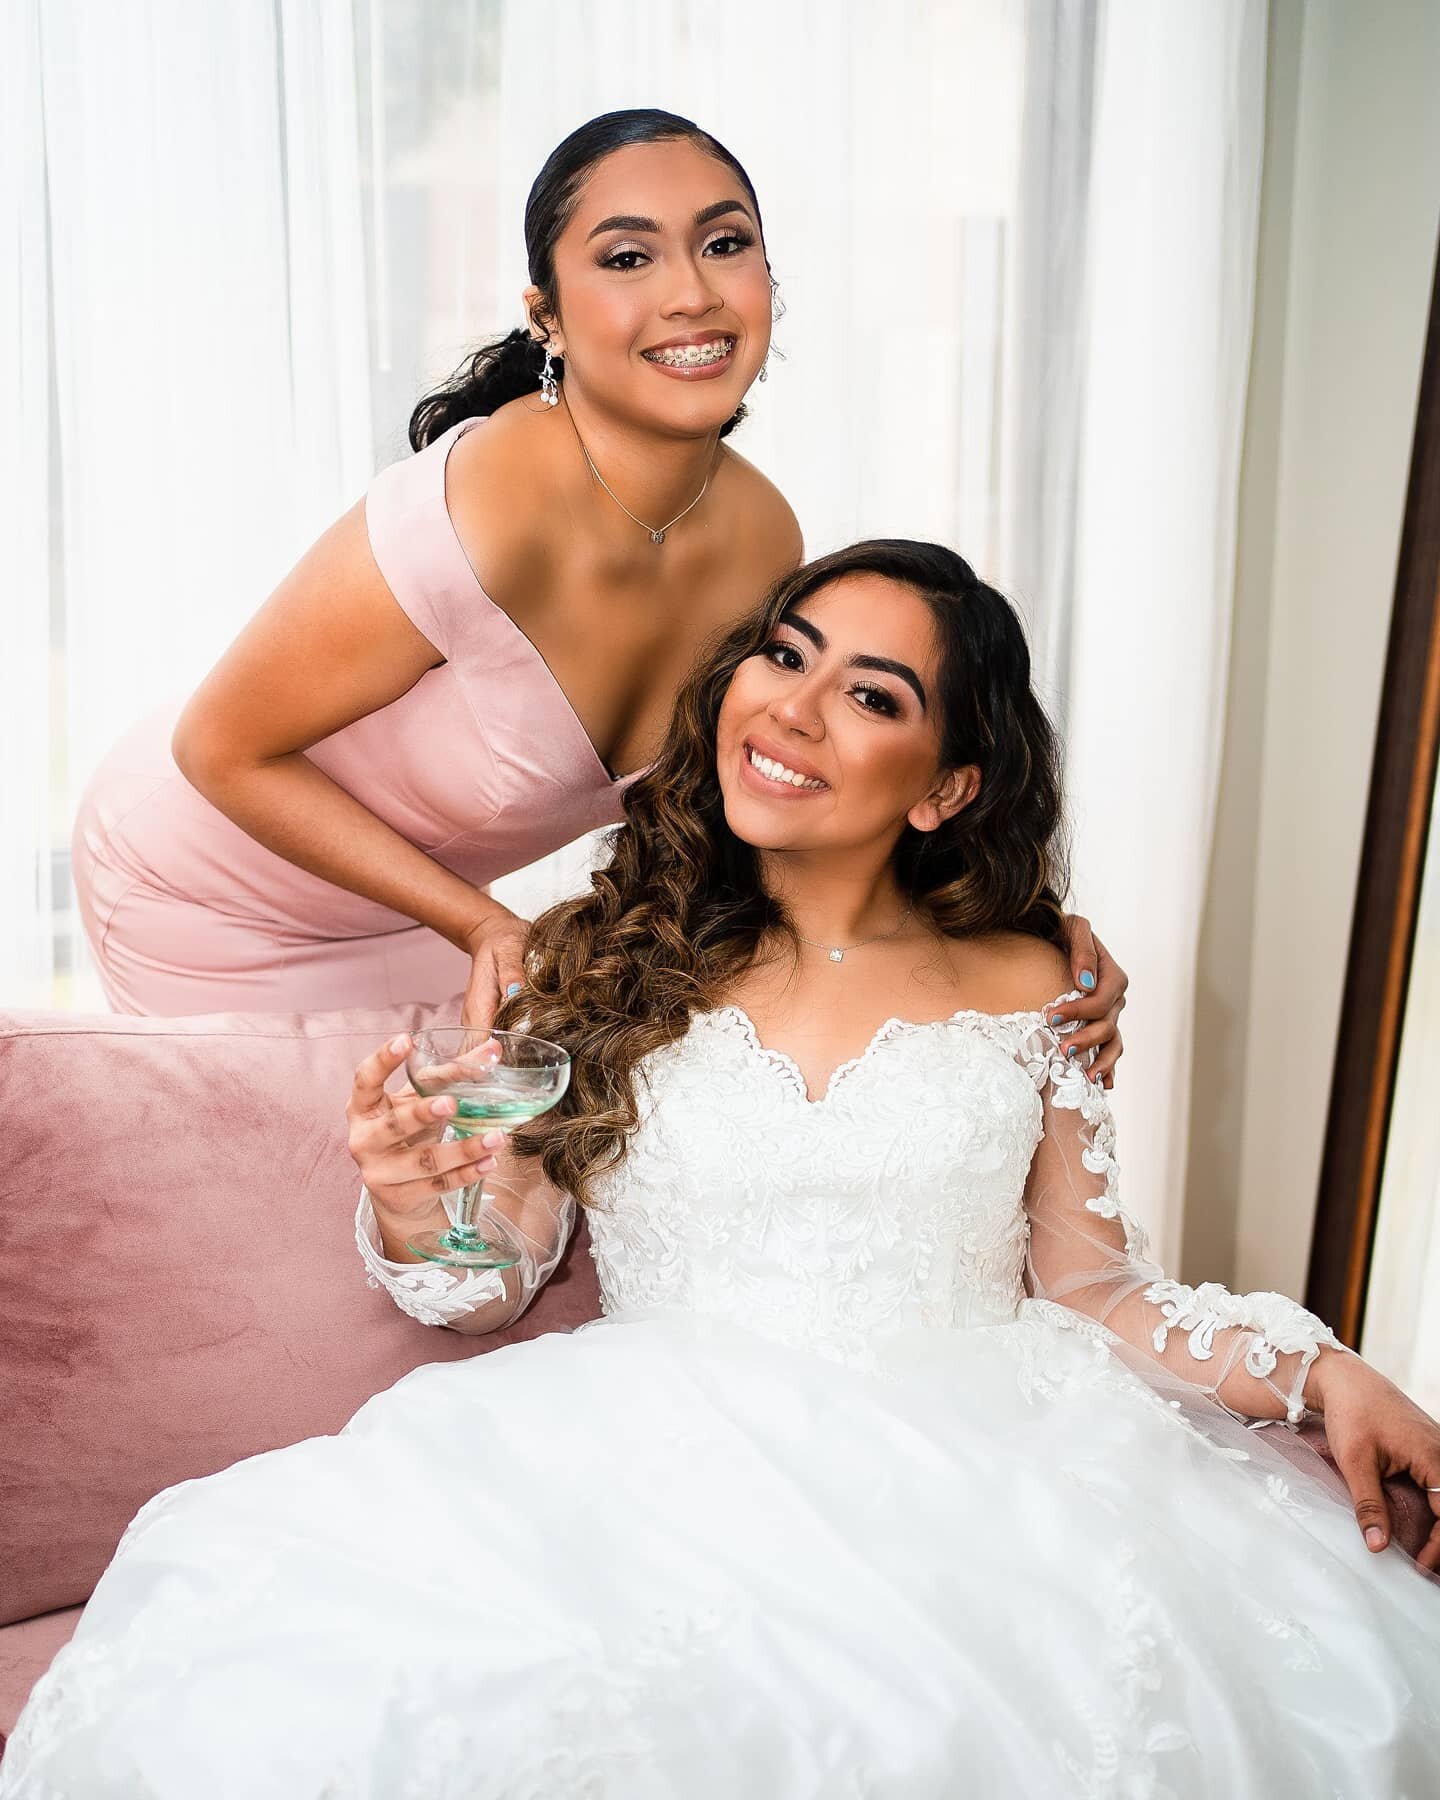 There is nothing like having your bestie with you on your big day! Remember we have bridesmaids gowns as well as formal gowns, so everyone can say YES to the dress!

Bridal gown: Lively 
Bridesmaids gown: L7177 in blush 

Special thanks to @thefengme